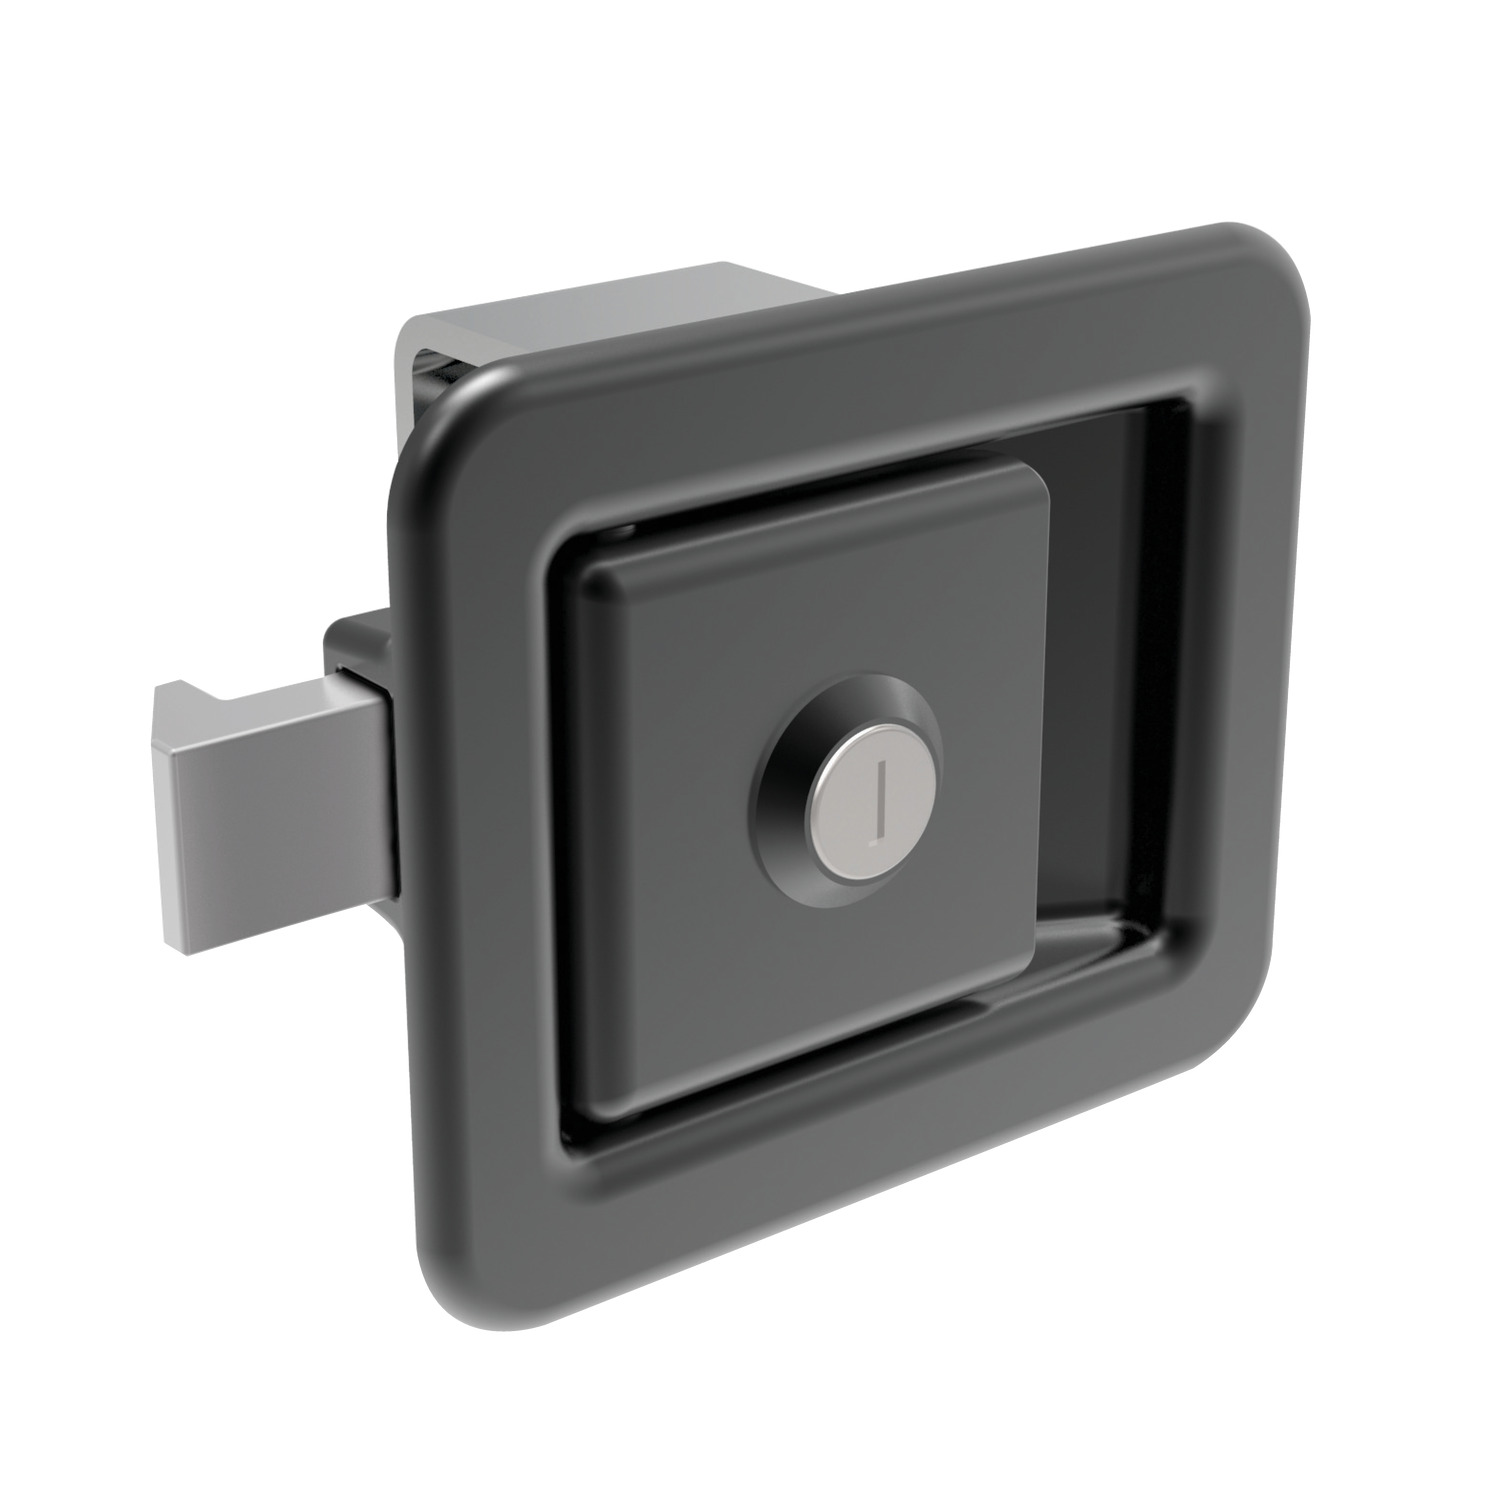 Product B4703, Push To Close Paddle Latches pull to open - slam action - standard cylinder lock - steel / 